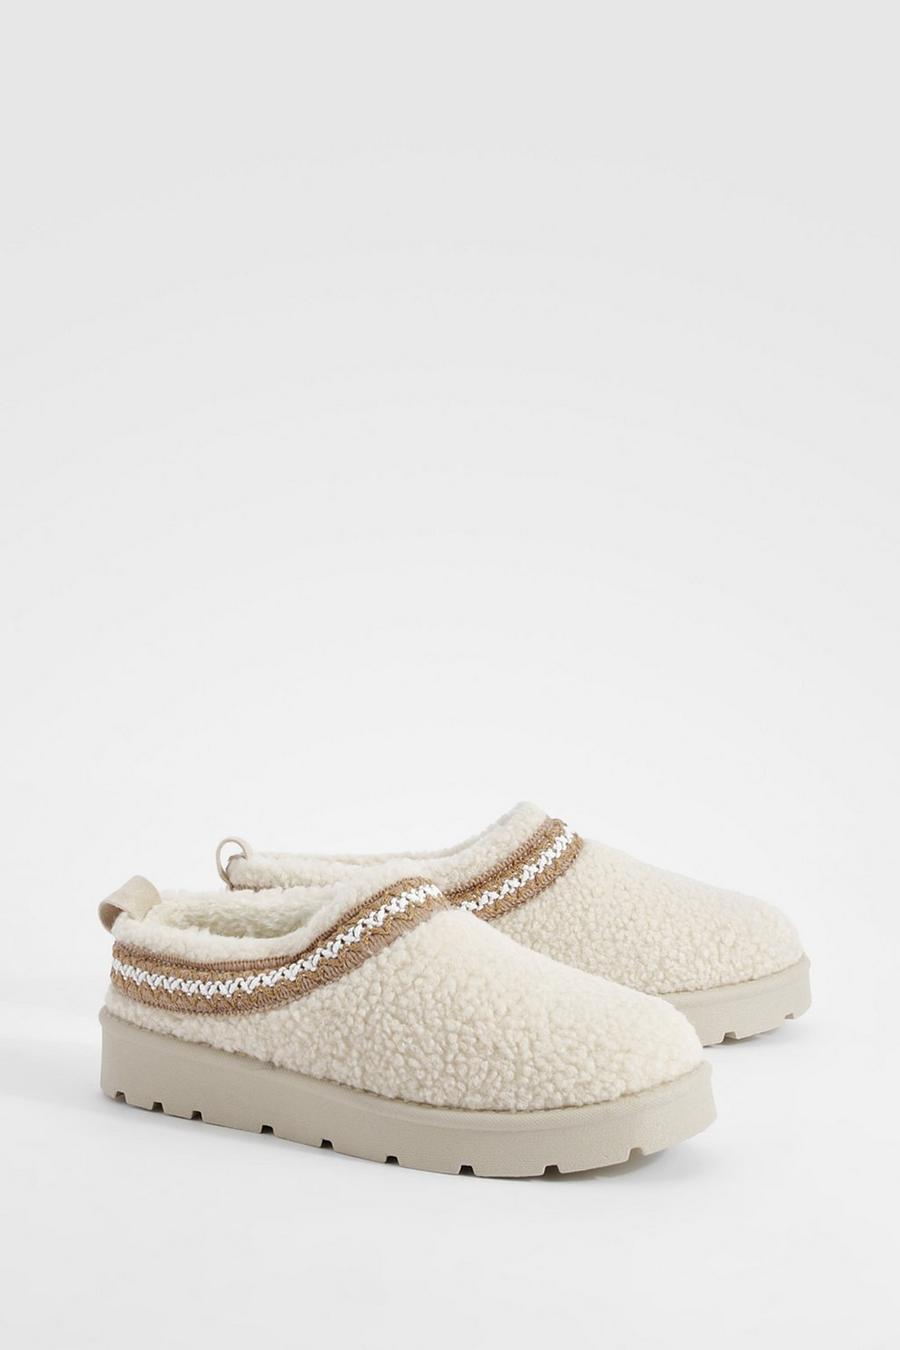 Beige Embroidered Detailing Borg Slip On Cozy Mules